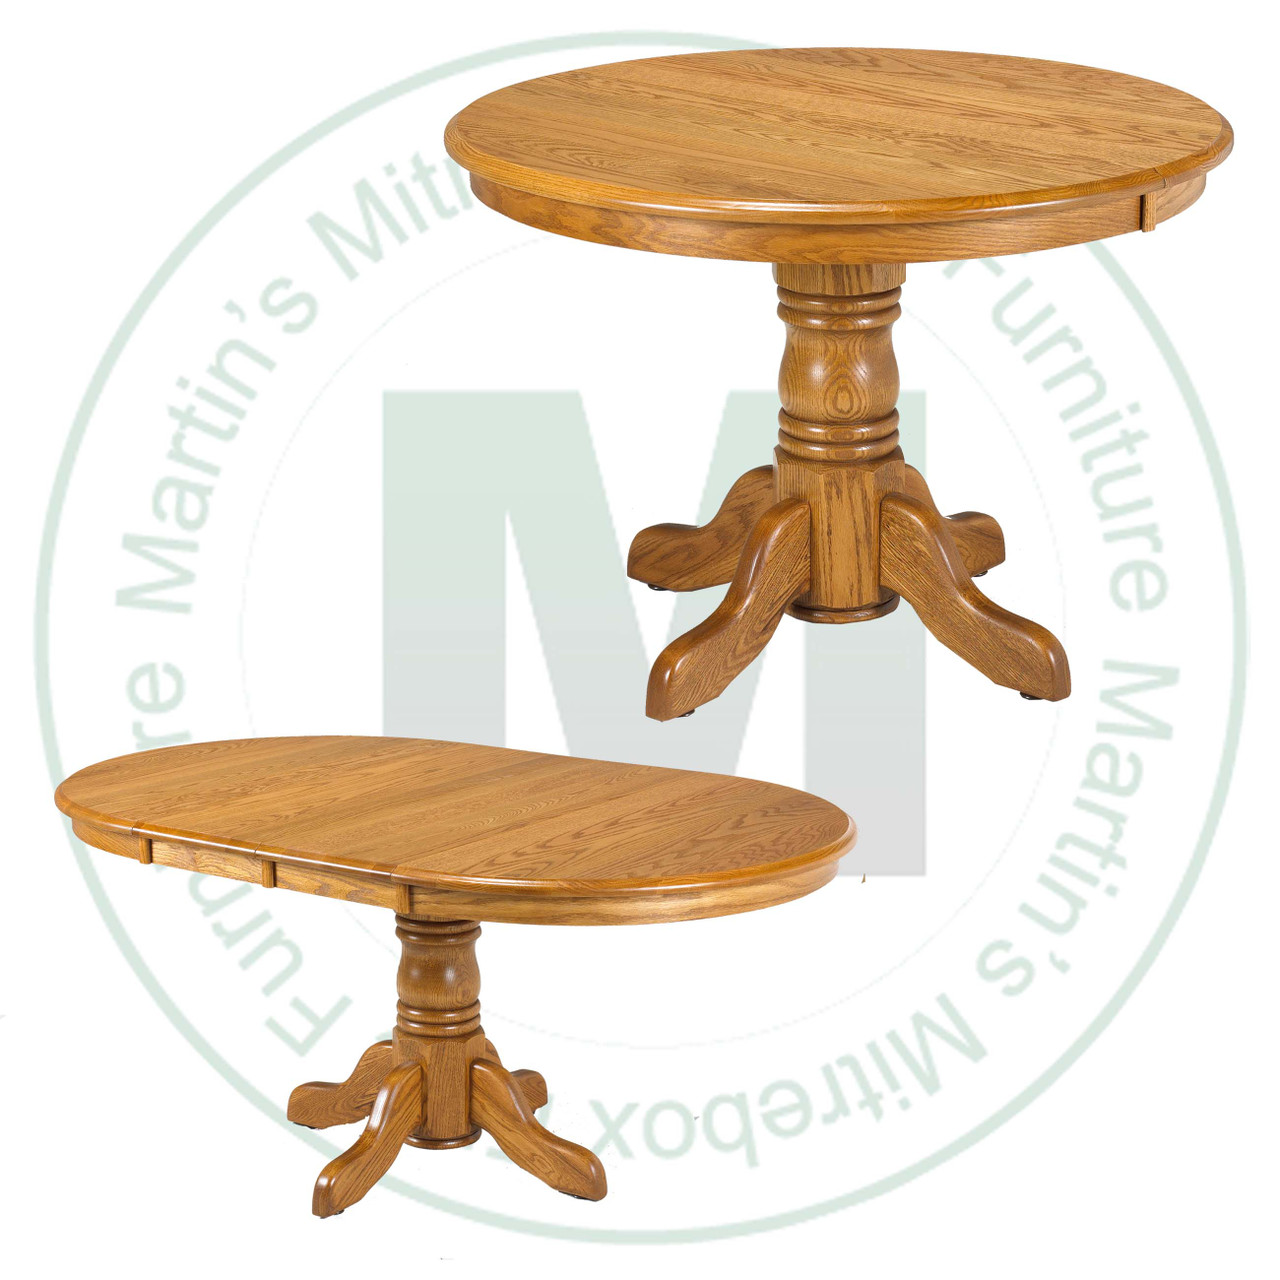 Maple Lancaster Collection Single Pedestal Table 36''D x 36''W x 30''H With 1 - 12'' Leaf. Table Has 1.25'' Thick Top